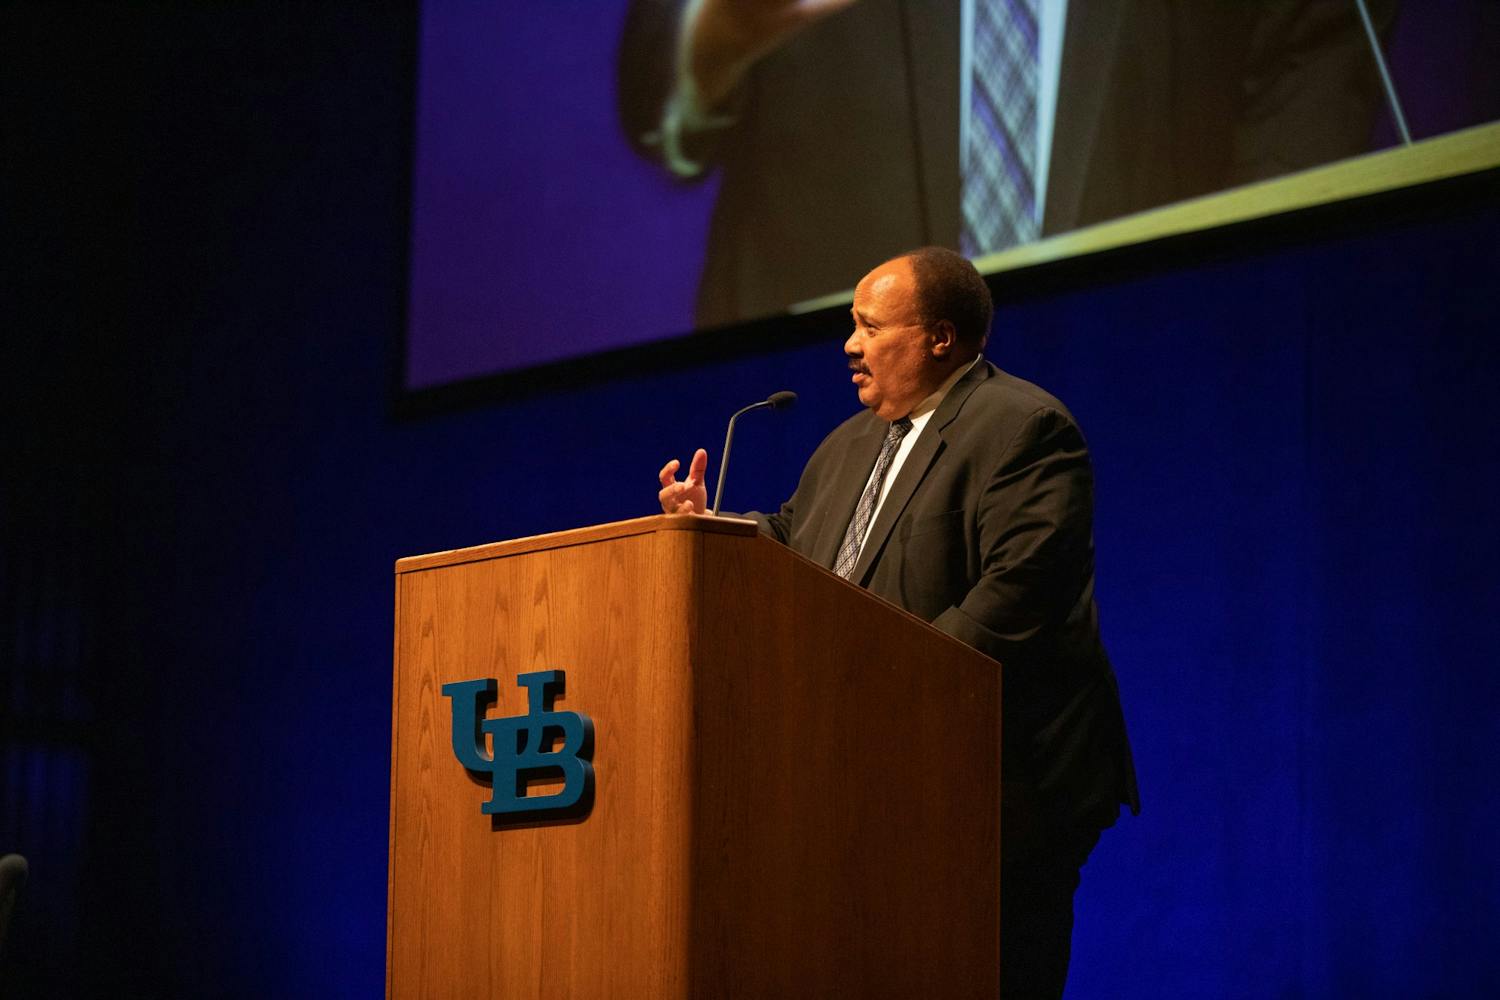 Martin Luther King III, the eldest son of Martin Luther King Jr., spoke at the Center for the Arts Tuesday evening.